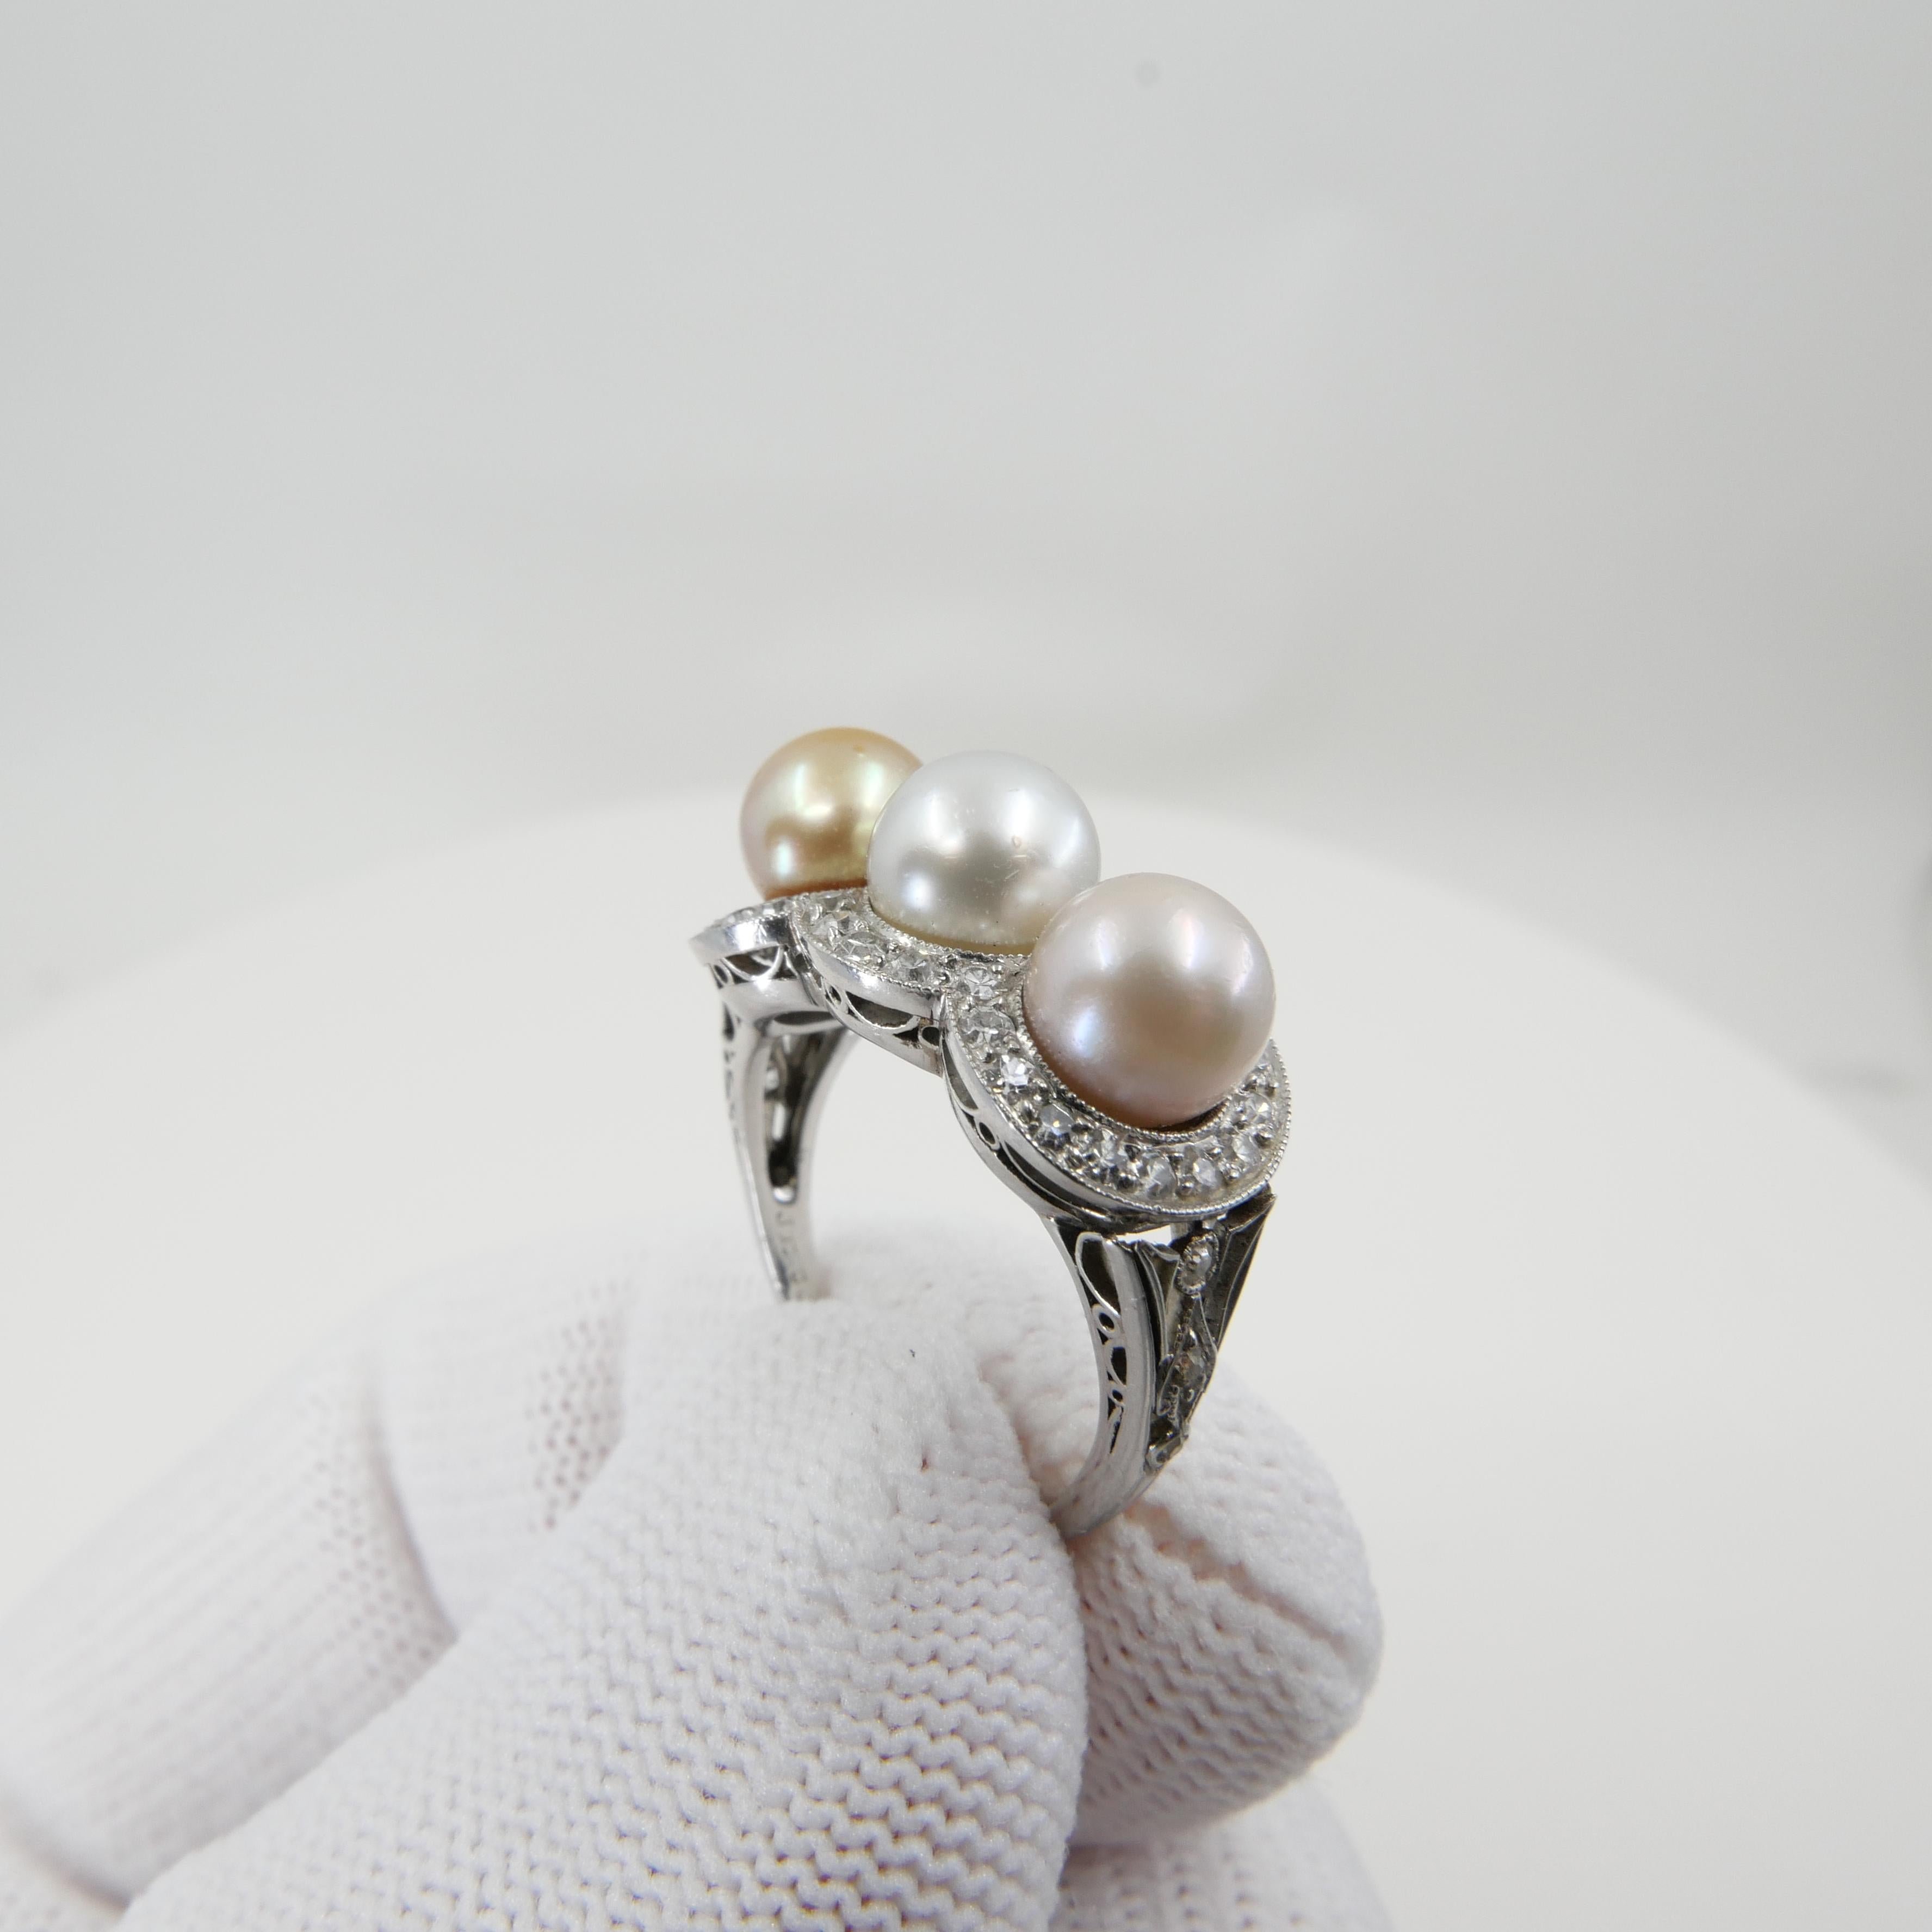 J E Caldwell Belle Epoque Certified 3 Natural Colored Pearls and Diamond Ring 8